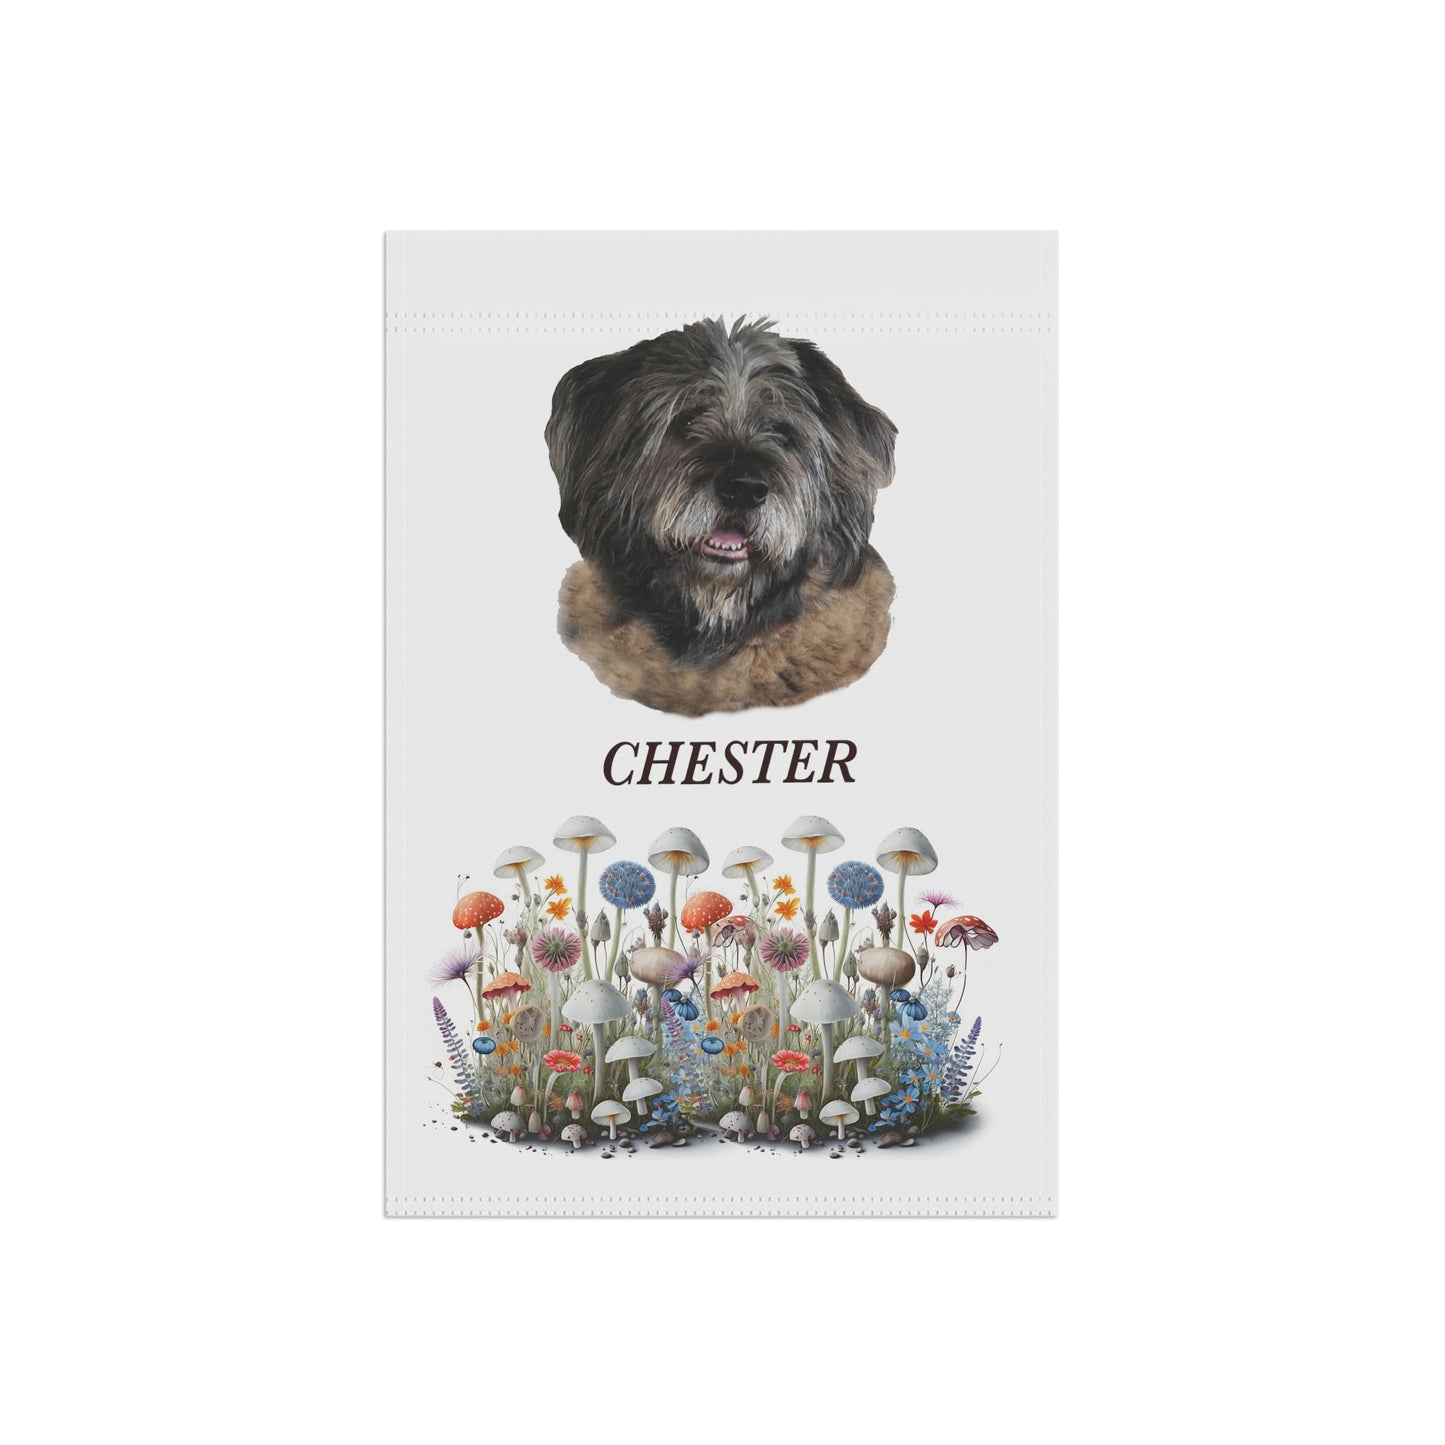 Your Pet's Photo Here! Garden & House Banner